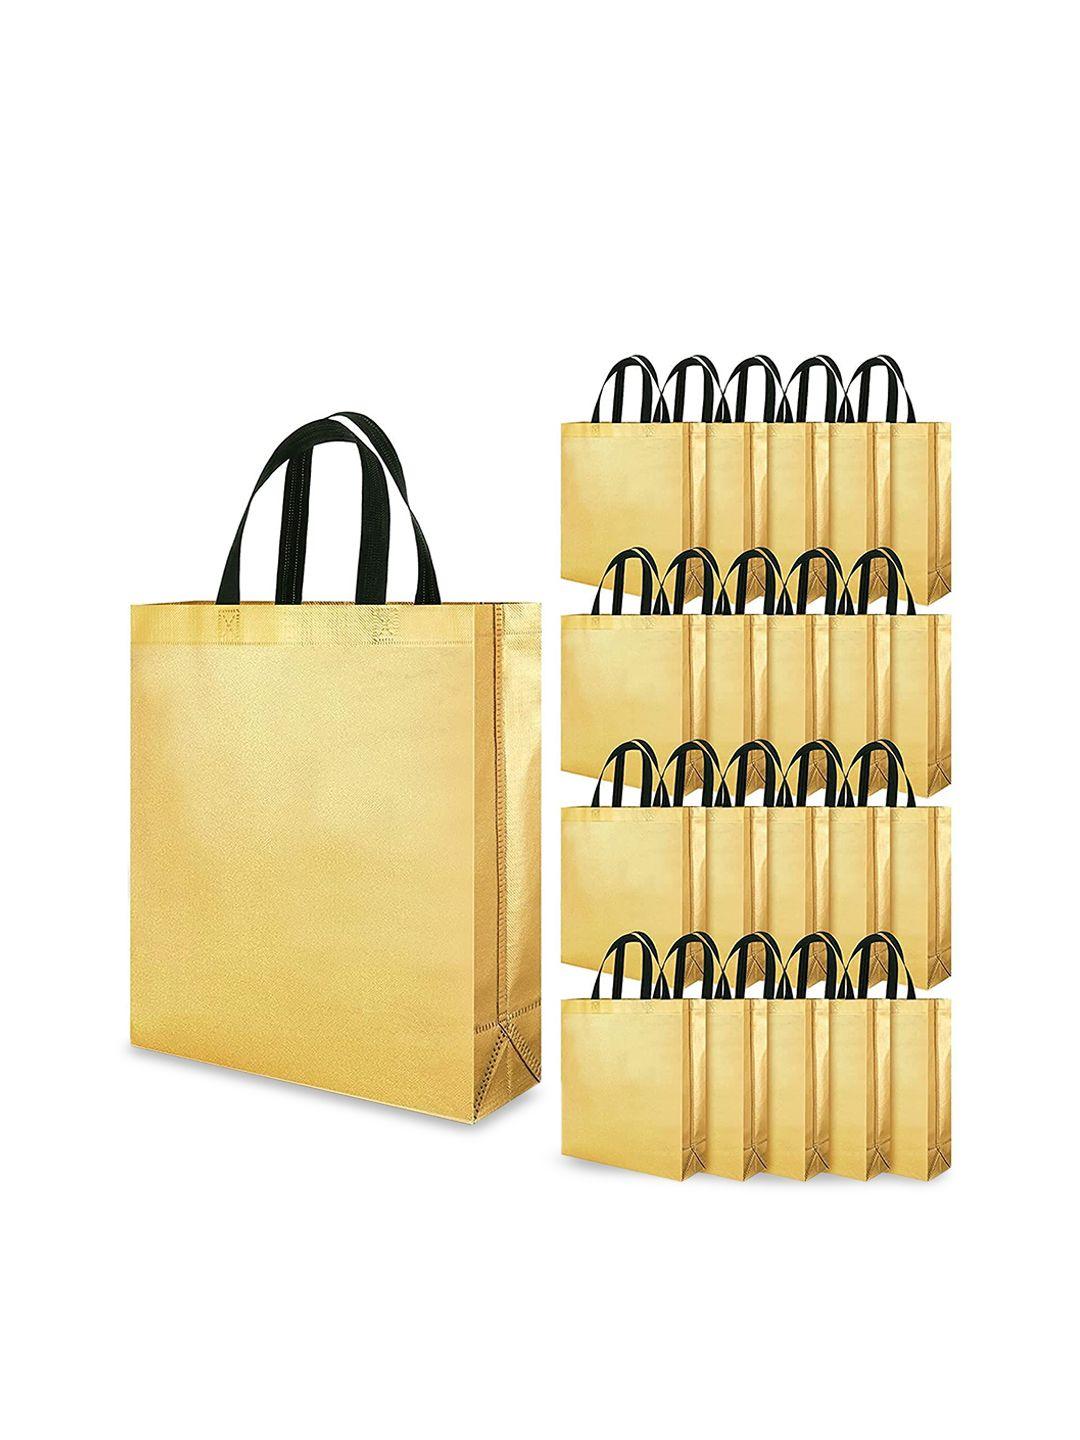 evafly pack of 10 shopper tote bags